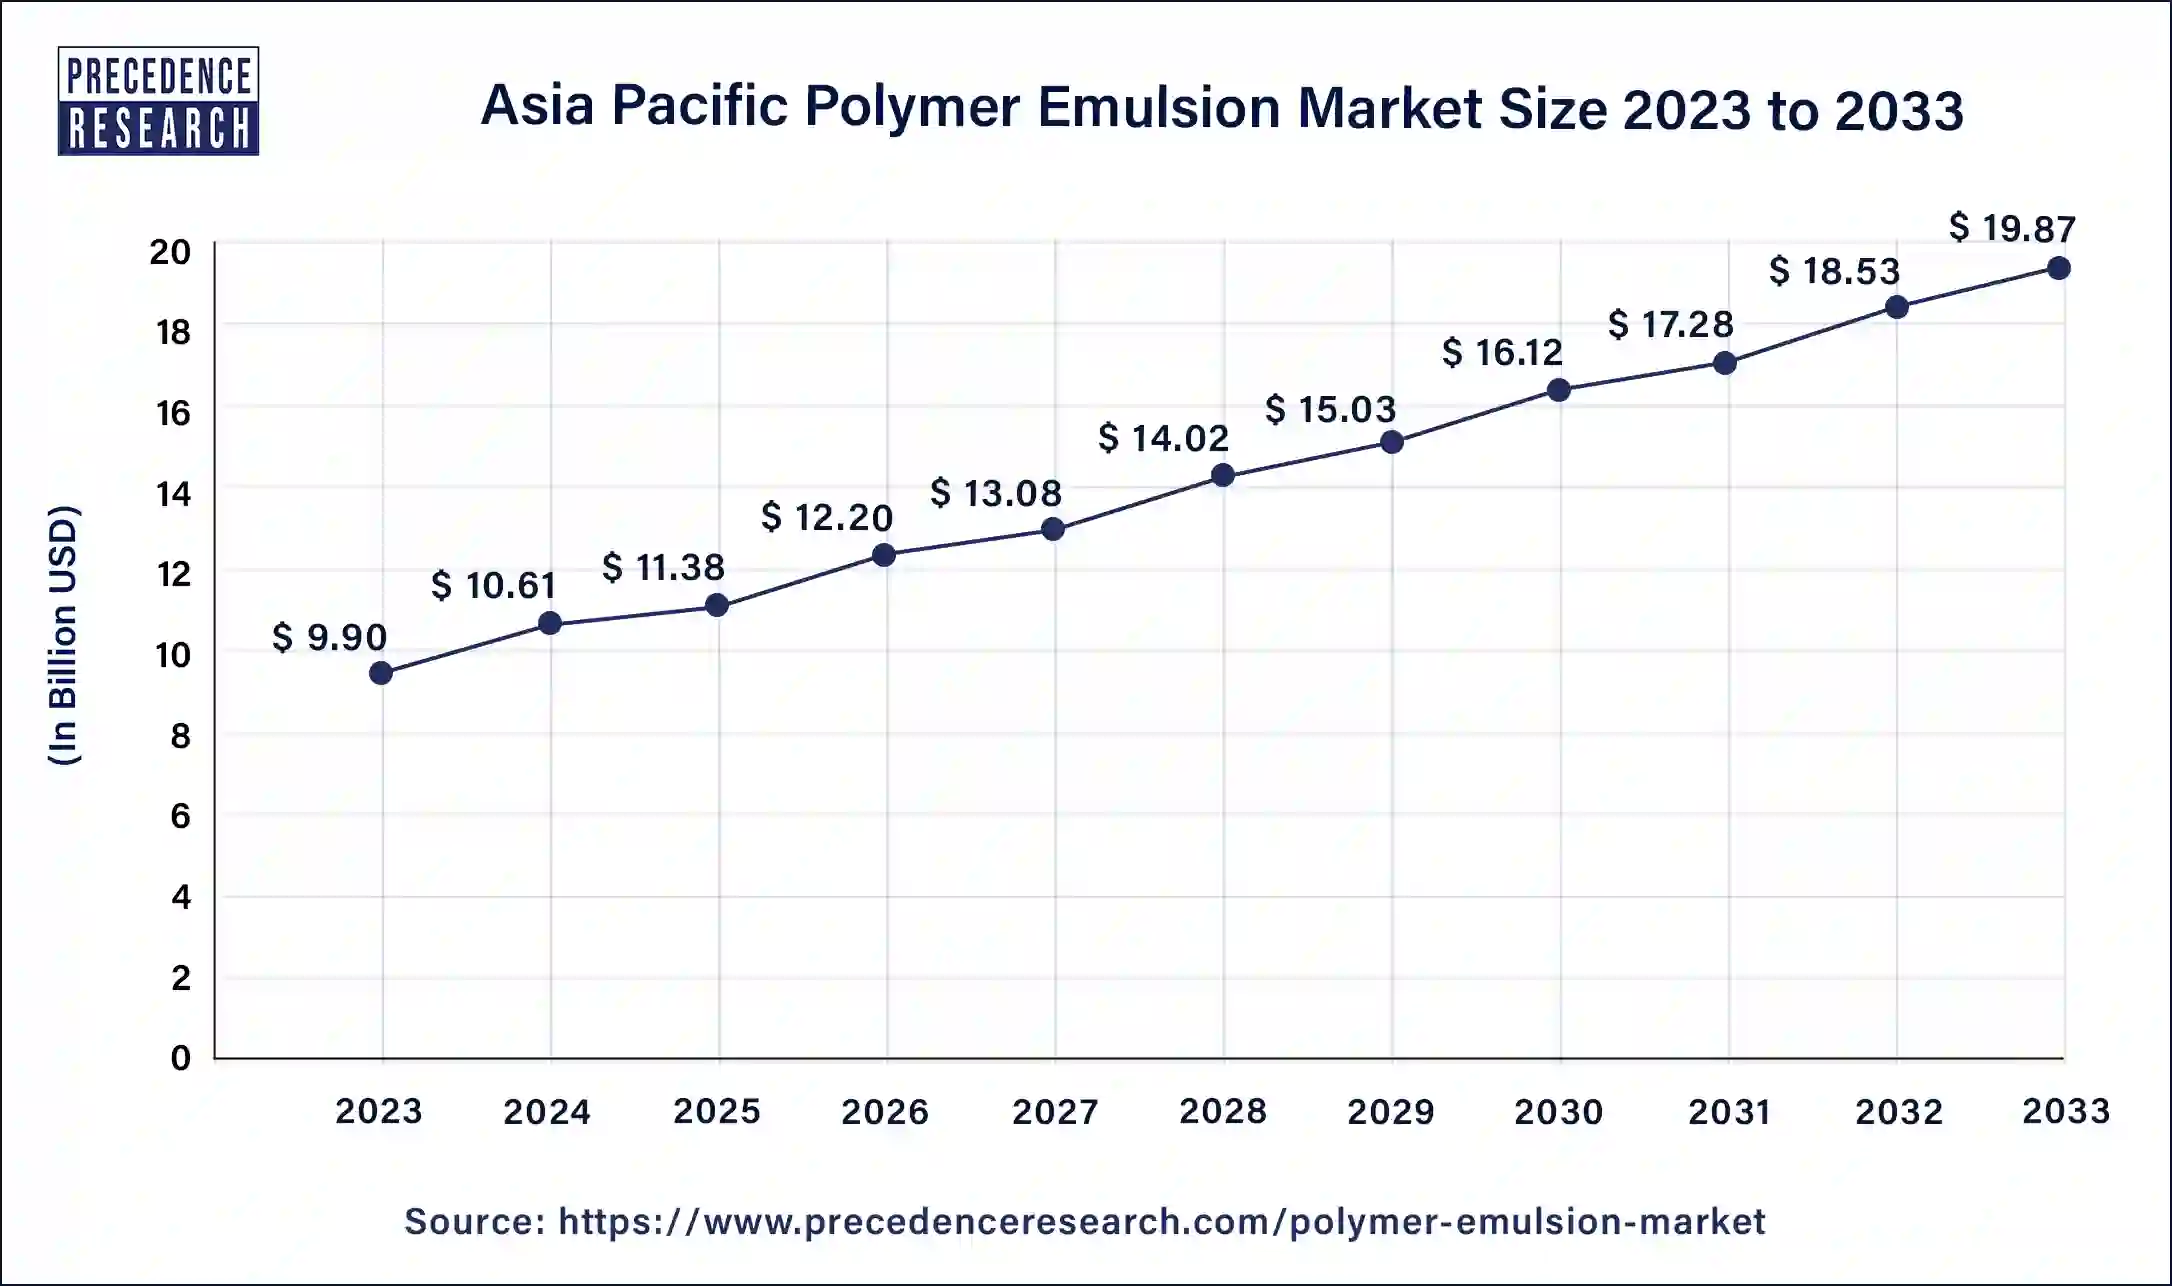 Asia Pacific Polymer Emulsion Market Size 2024 to 2033